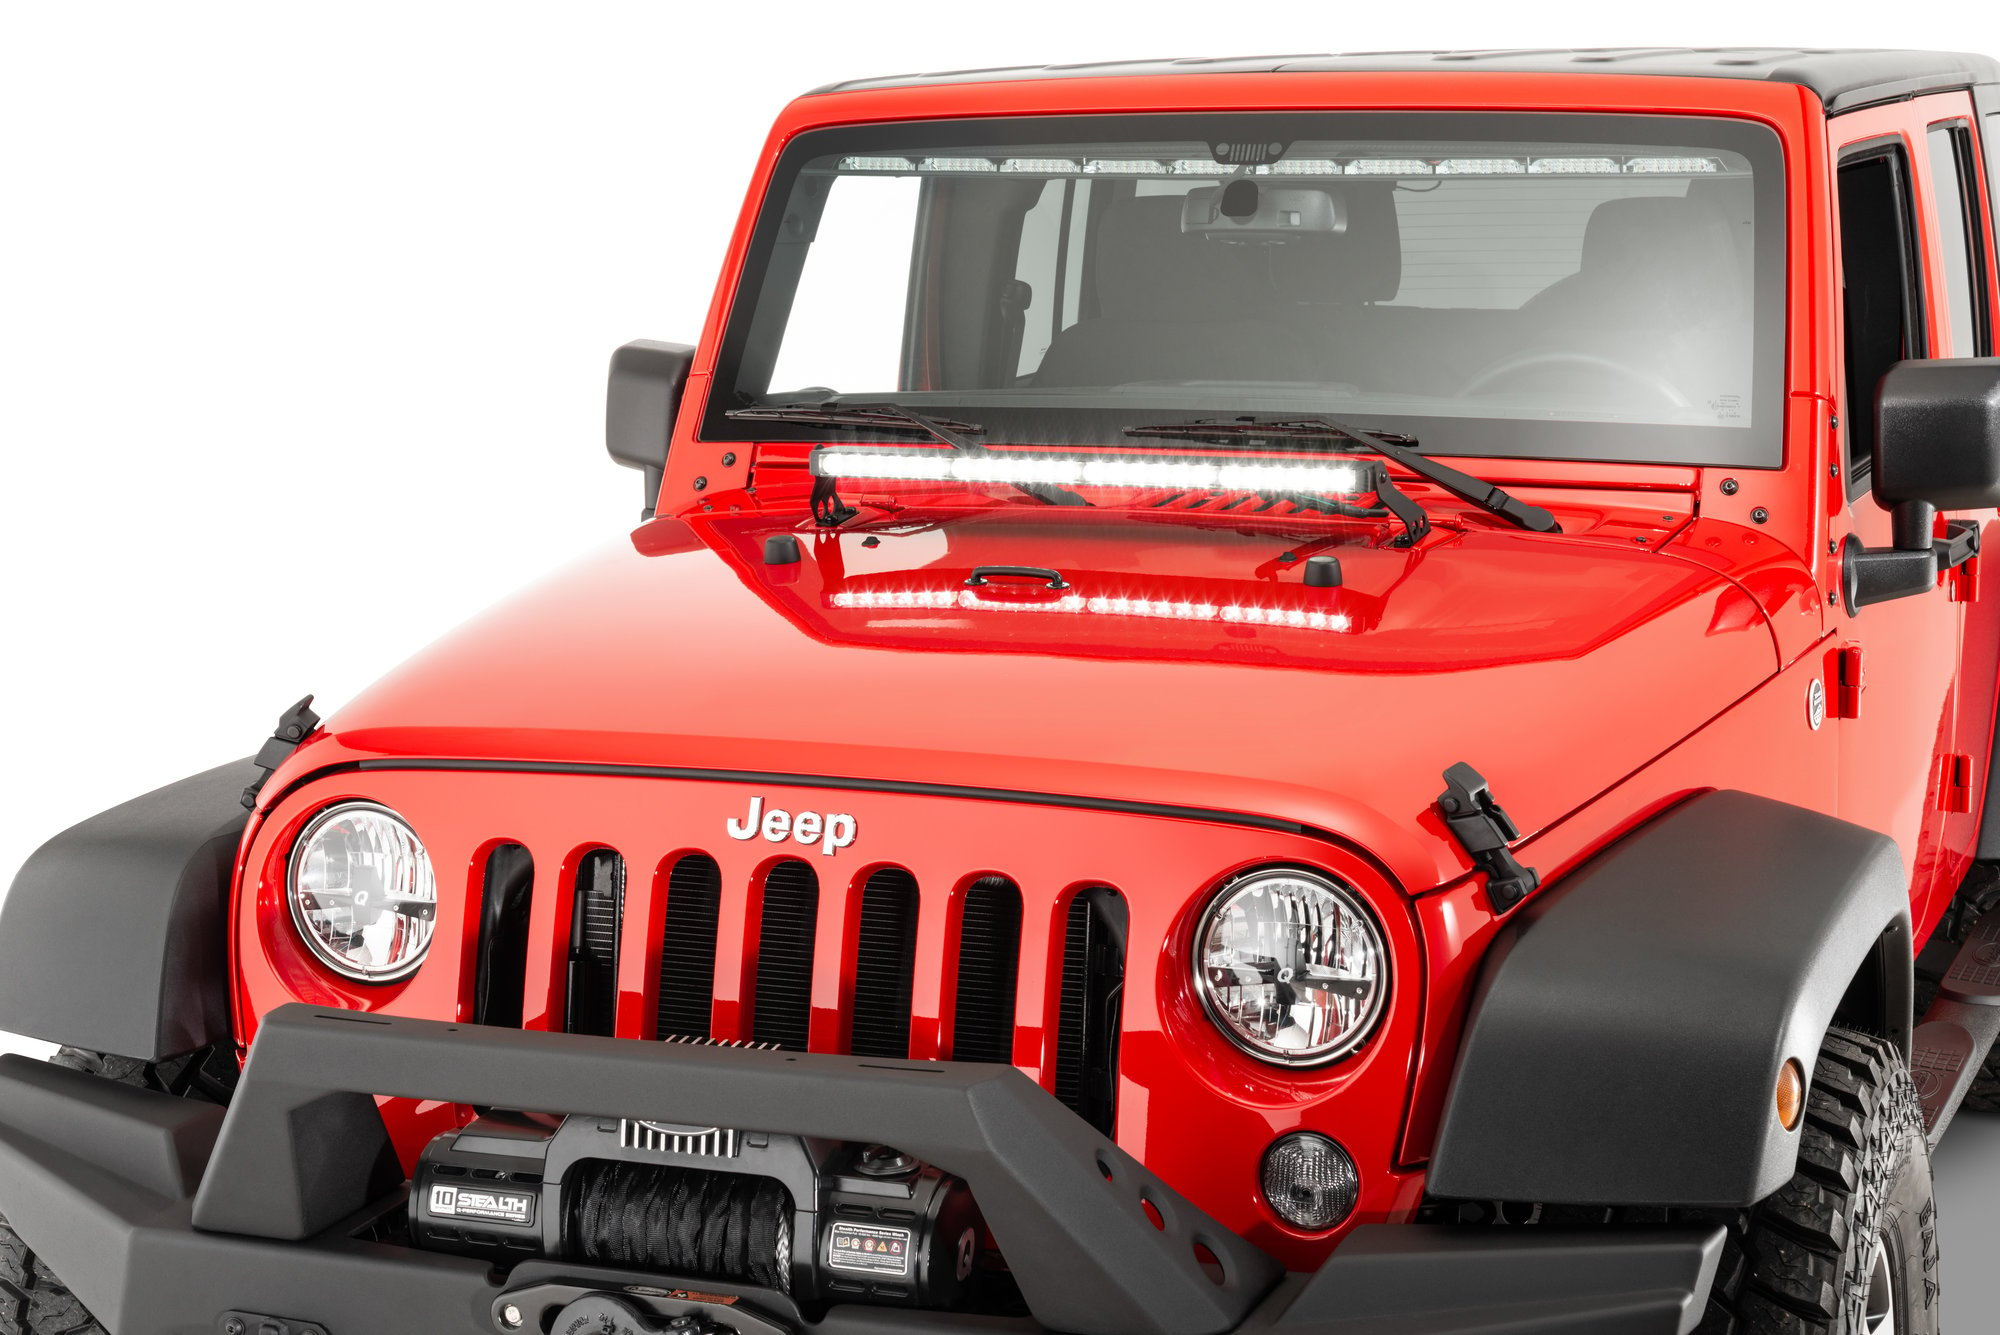 Quadratec Stealth 27" LED Light Bar with Hood Mount Brackets and Wiring for  07-18 Jeep Wrangler JK | Quadratec